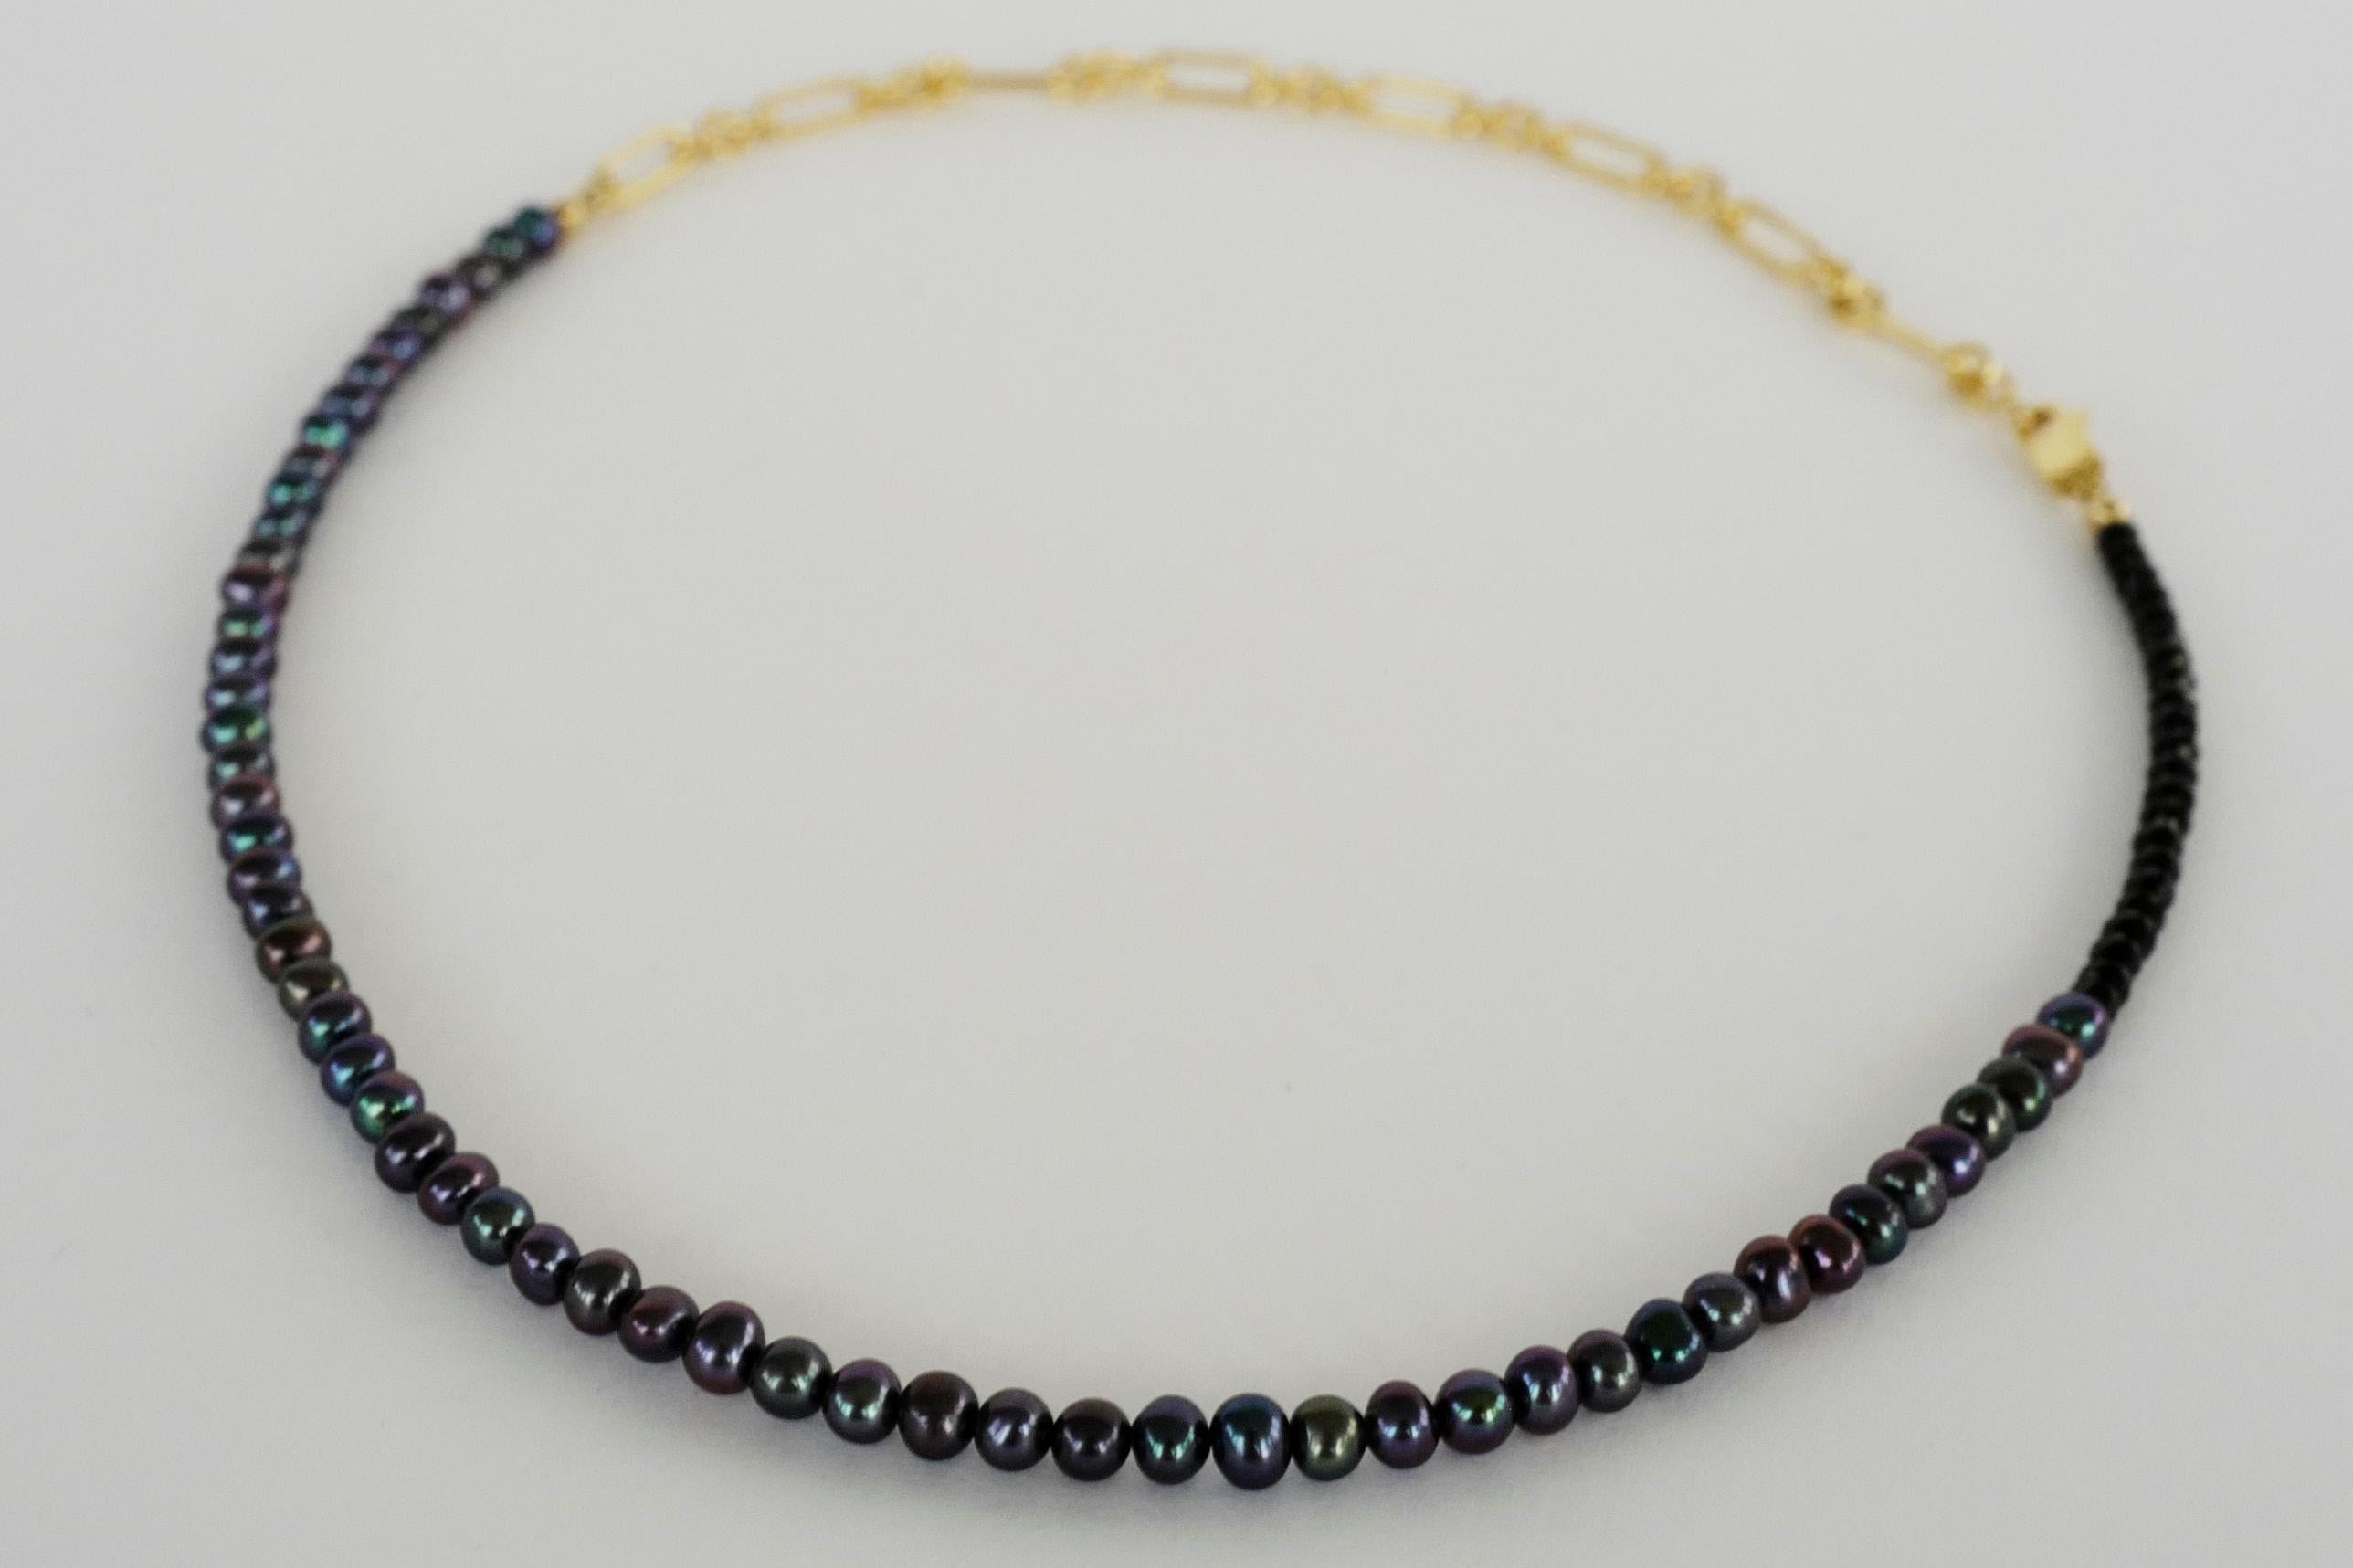 Romantic Black Pearl Beaded Choker Necklace Black Spinel Gold Filled Chain J Dauphin